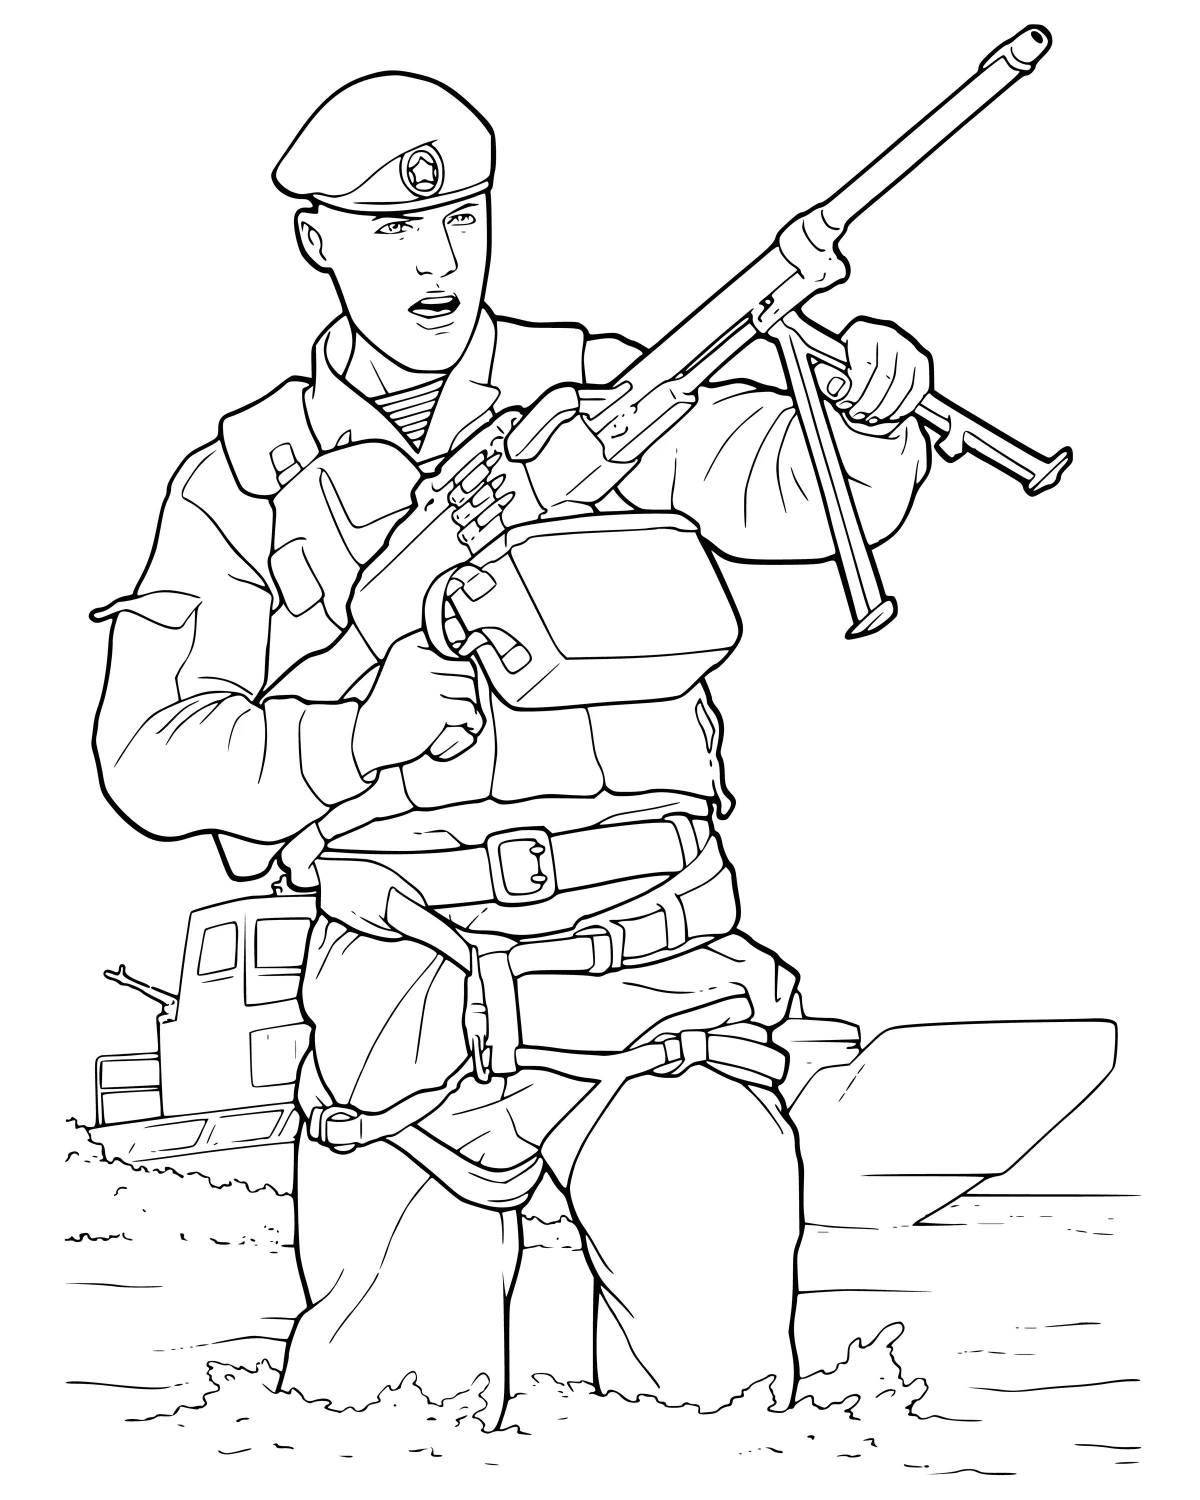 Playful infantry coloring page for toddlers